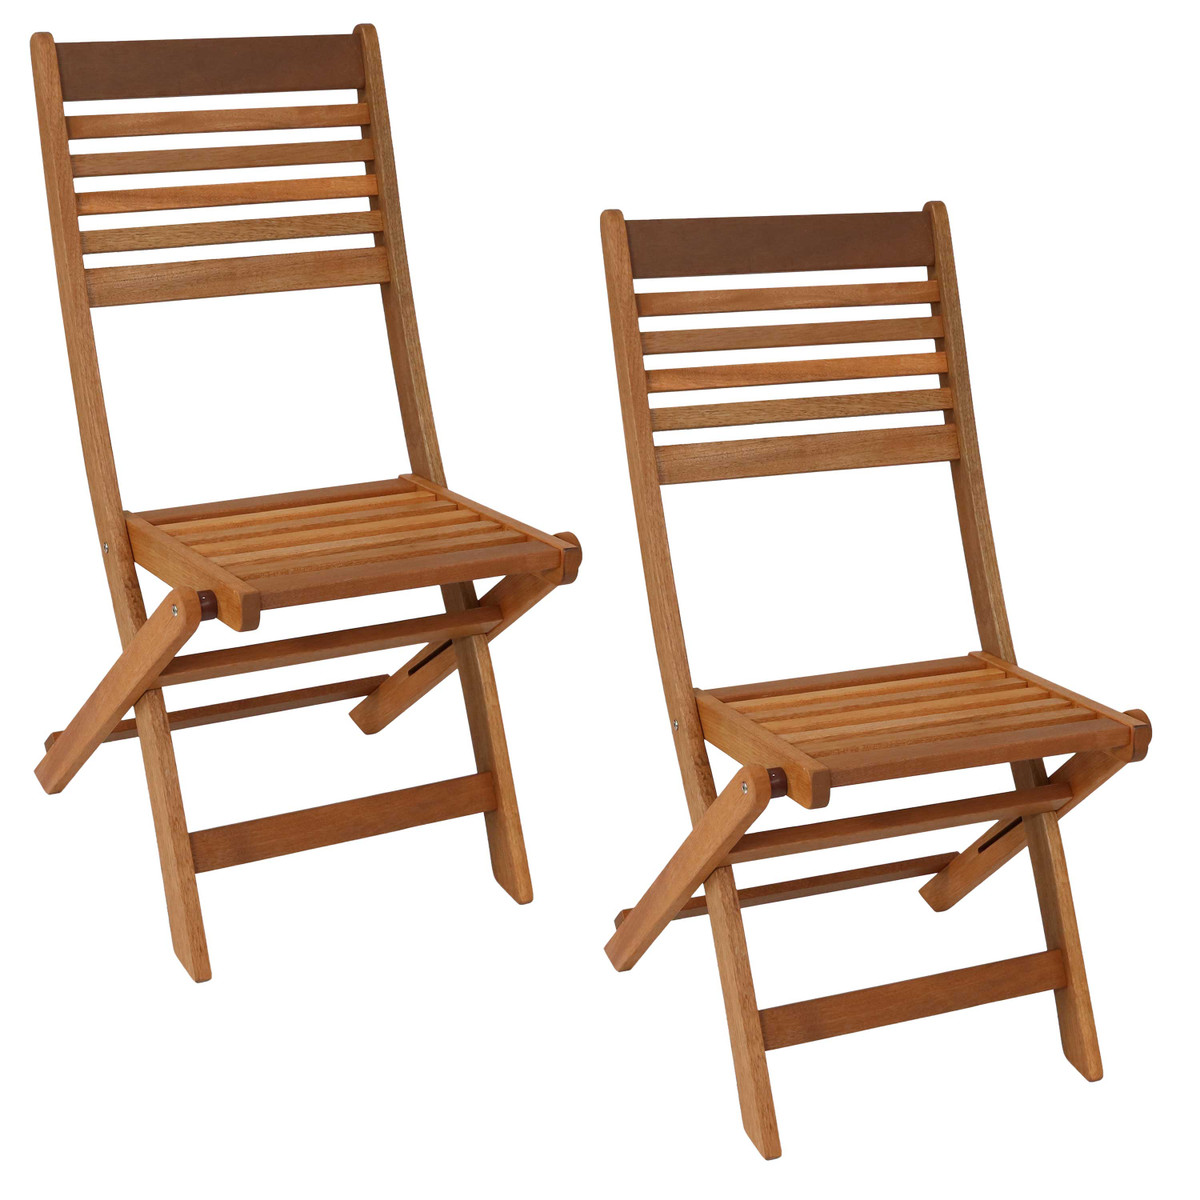 Outdoor Wooden Patio Furniture Sets  - If You�rE Looking For A Long Lasting Quality Made Outdoor Furniture, Check Out Our Outdoor Patio Furniture Sale.